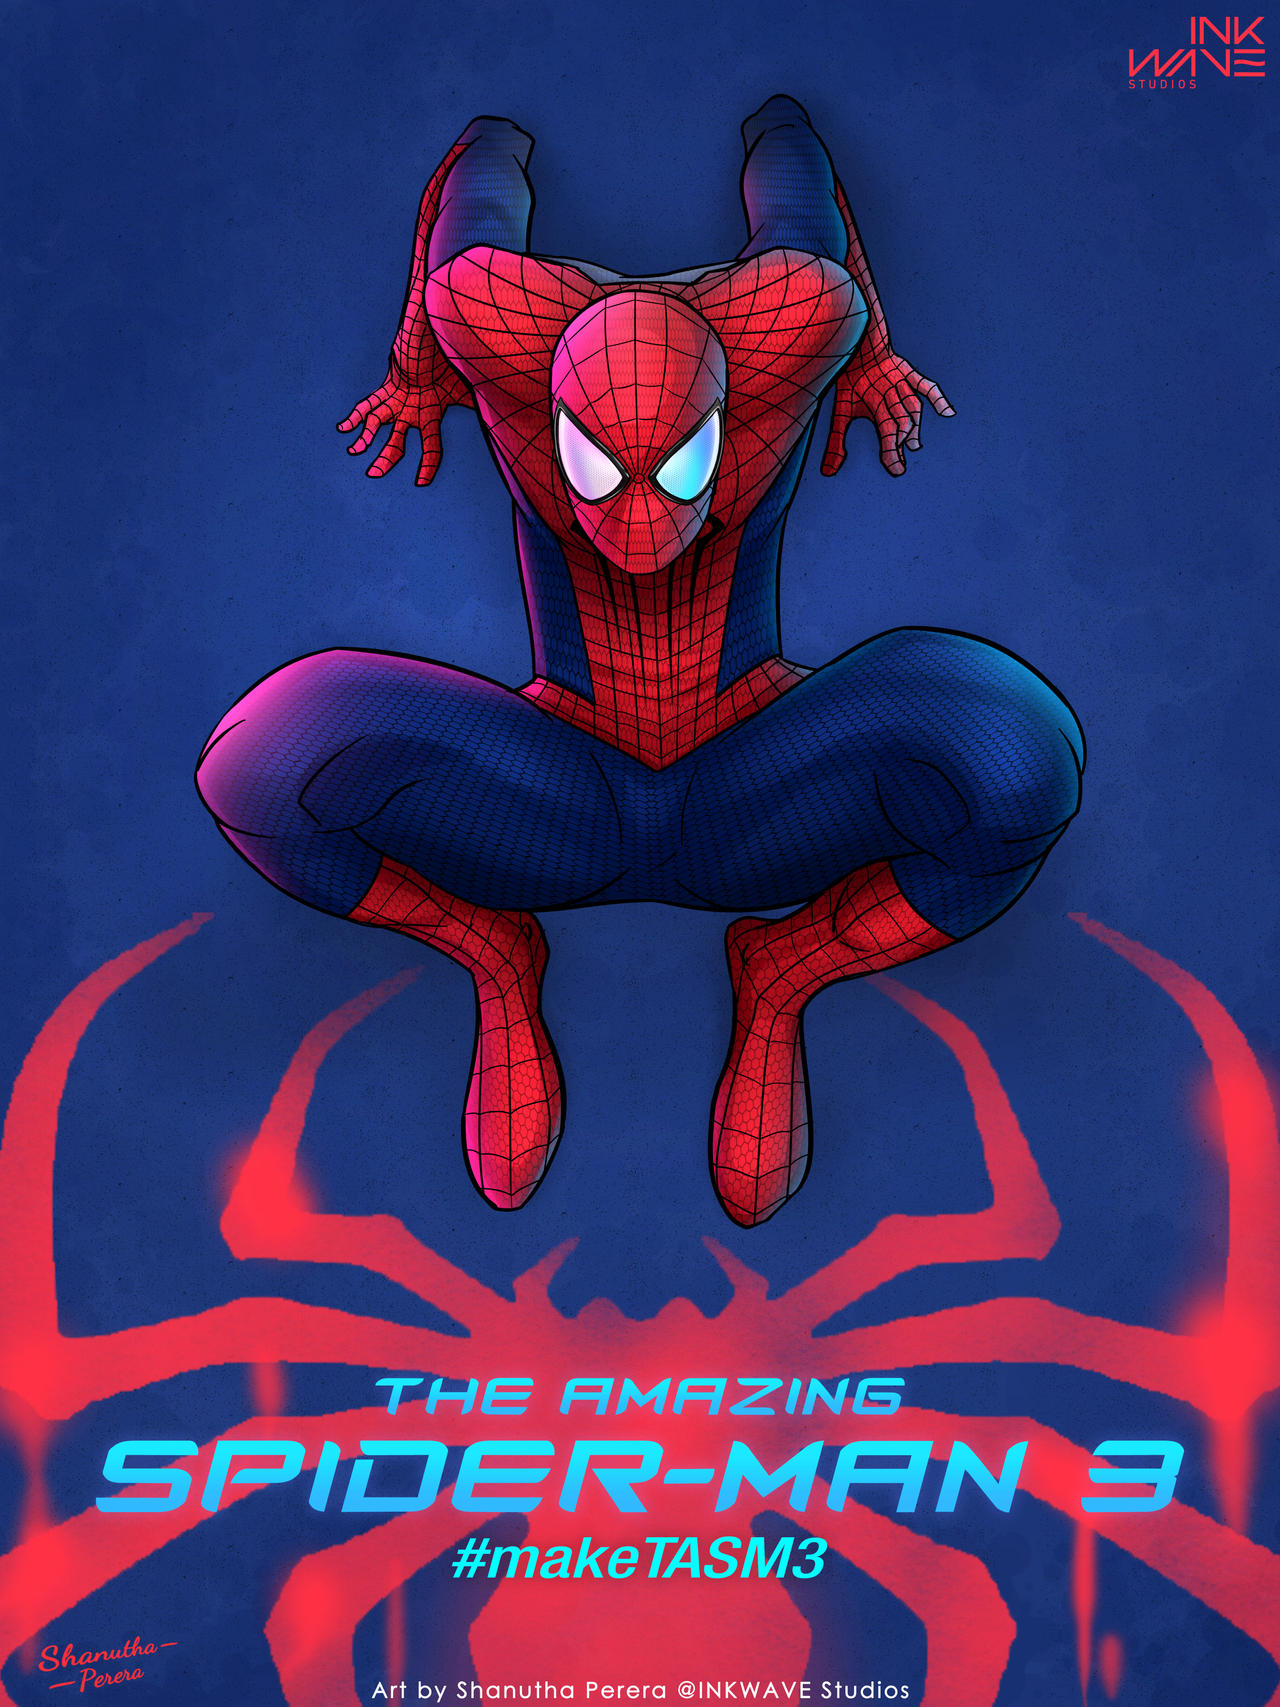 The Amazing Spider-man Drawing 3 by Nadscope99 on DeviantArt